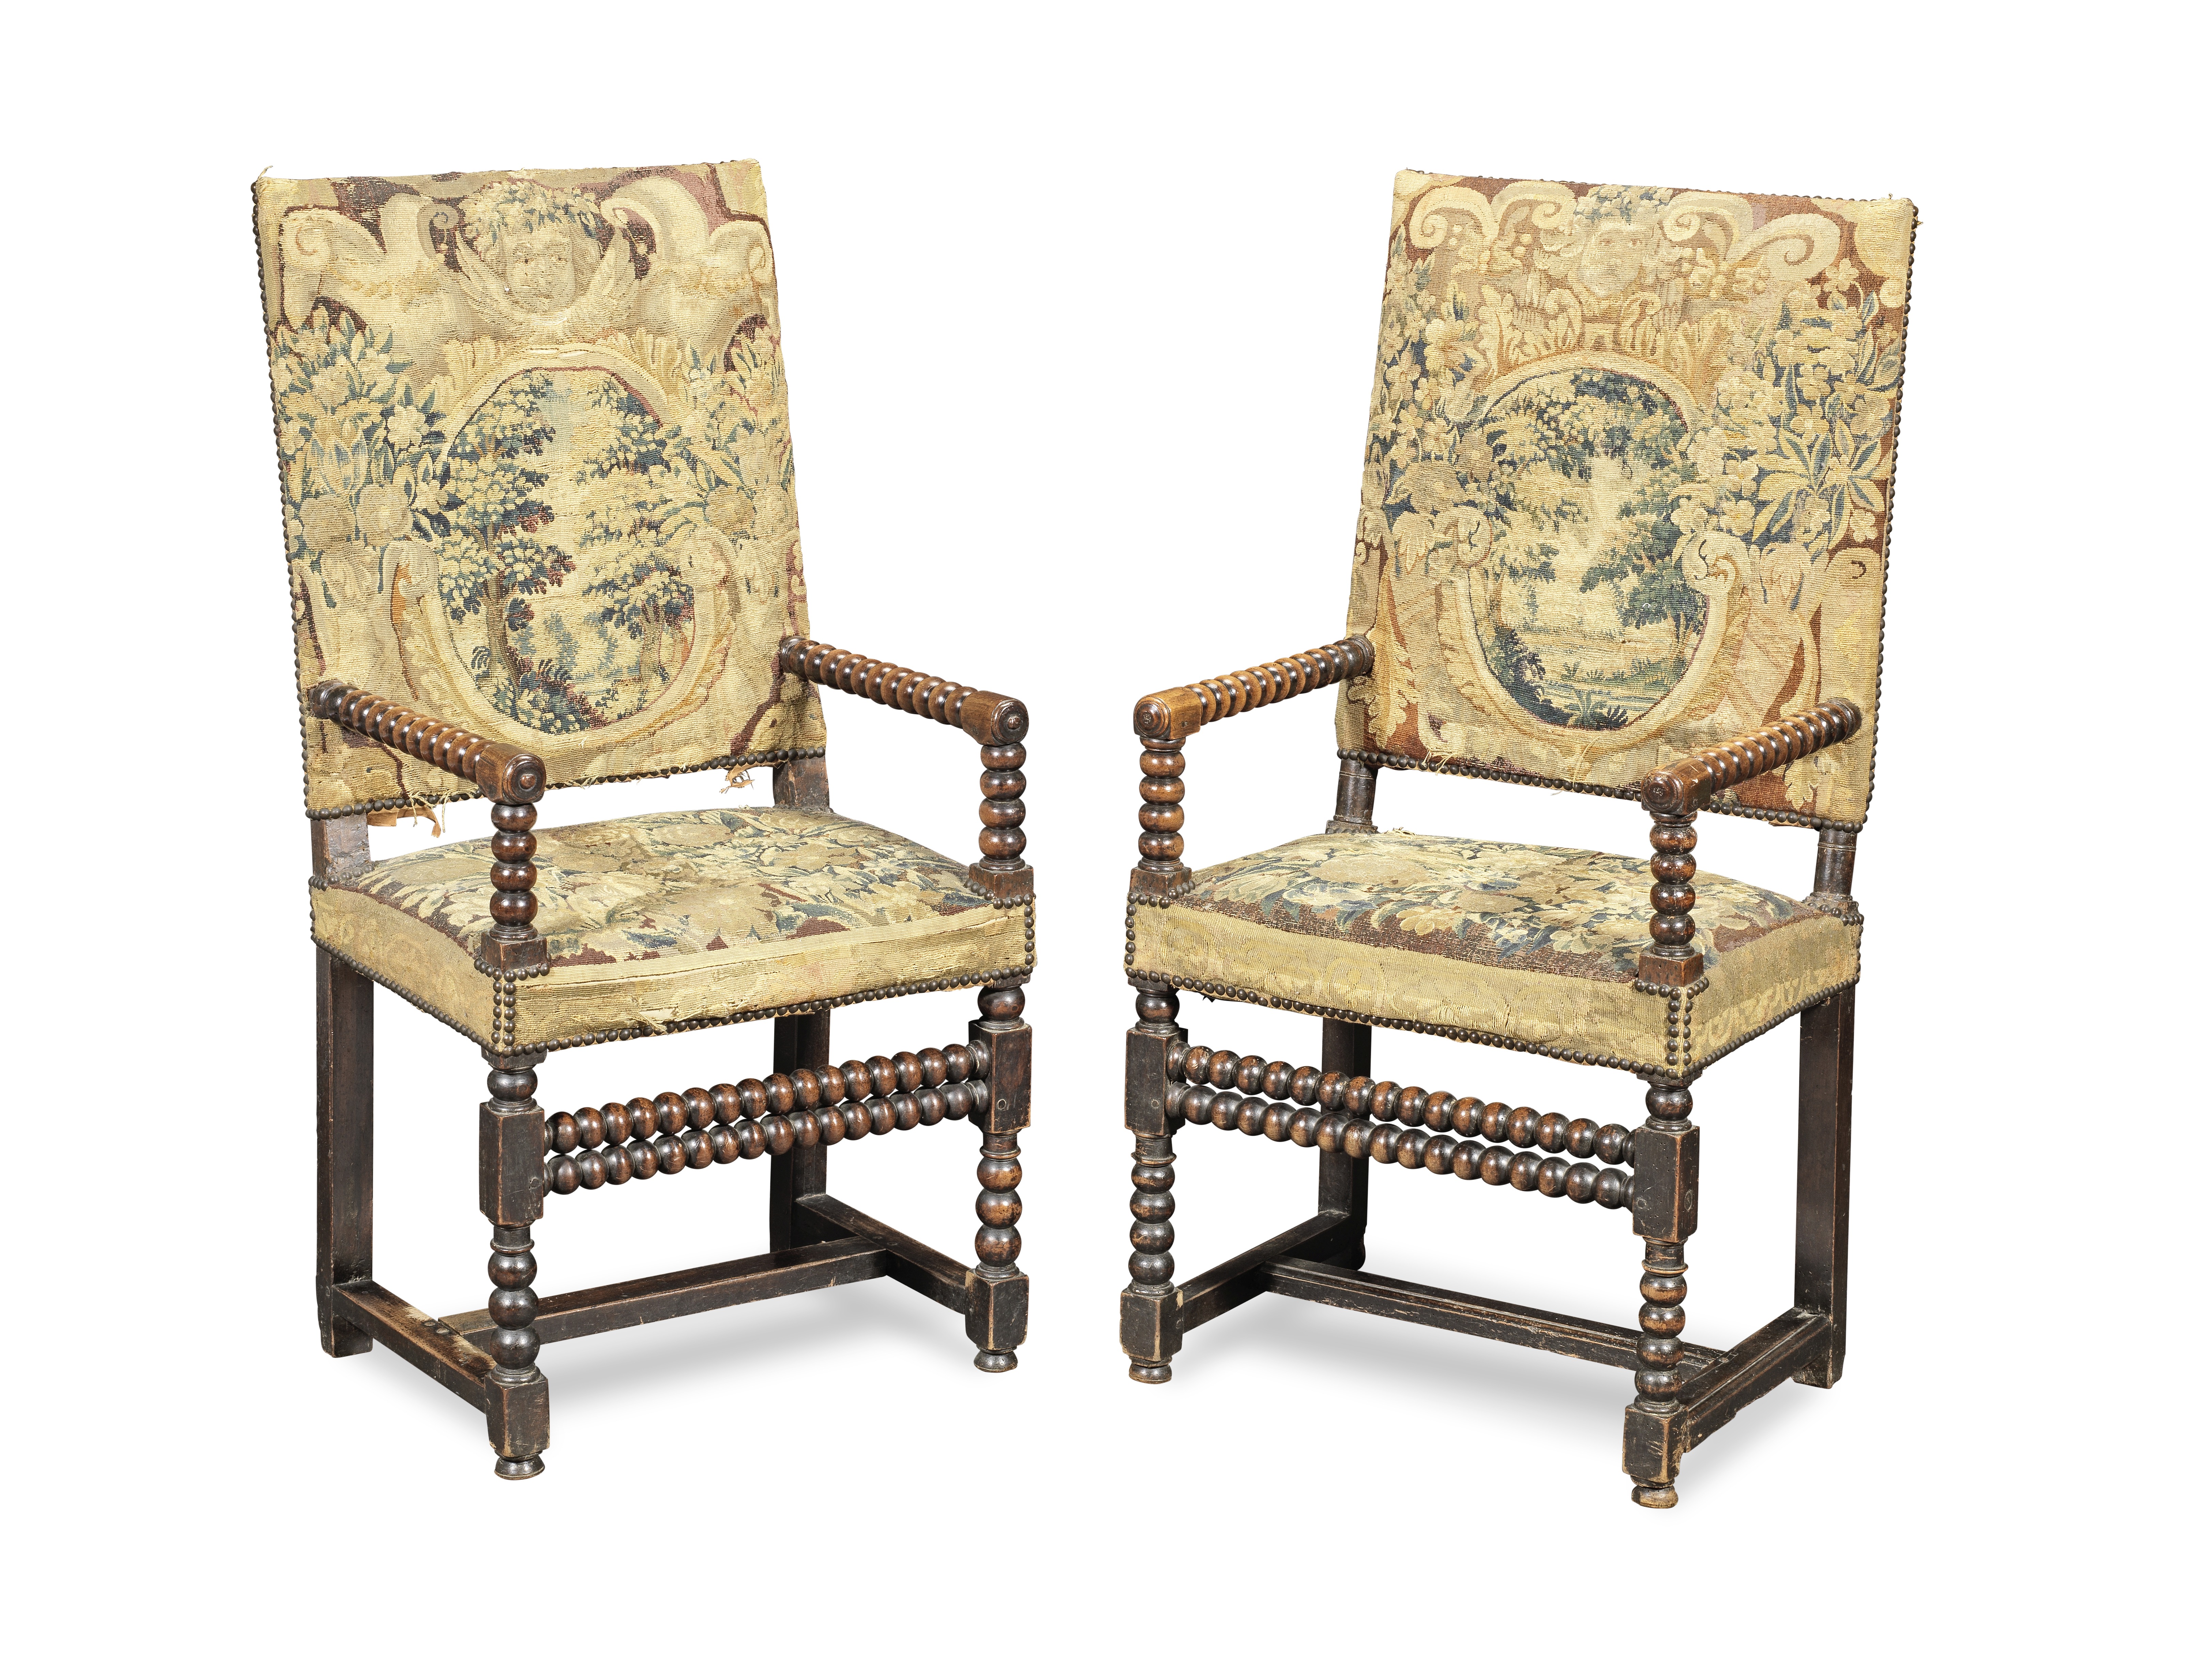 A matched pair of Franco-Flemish late 17th/early 18th century walnut fauteuils (2)